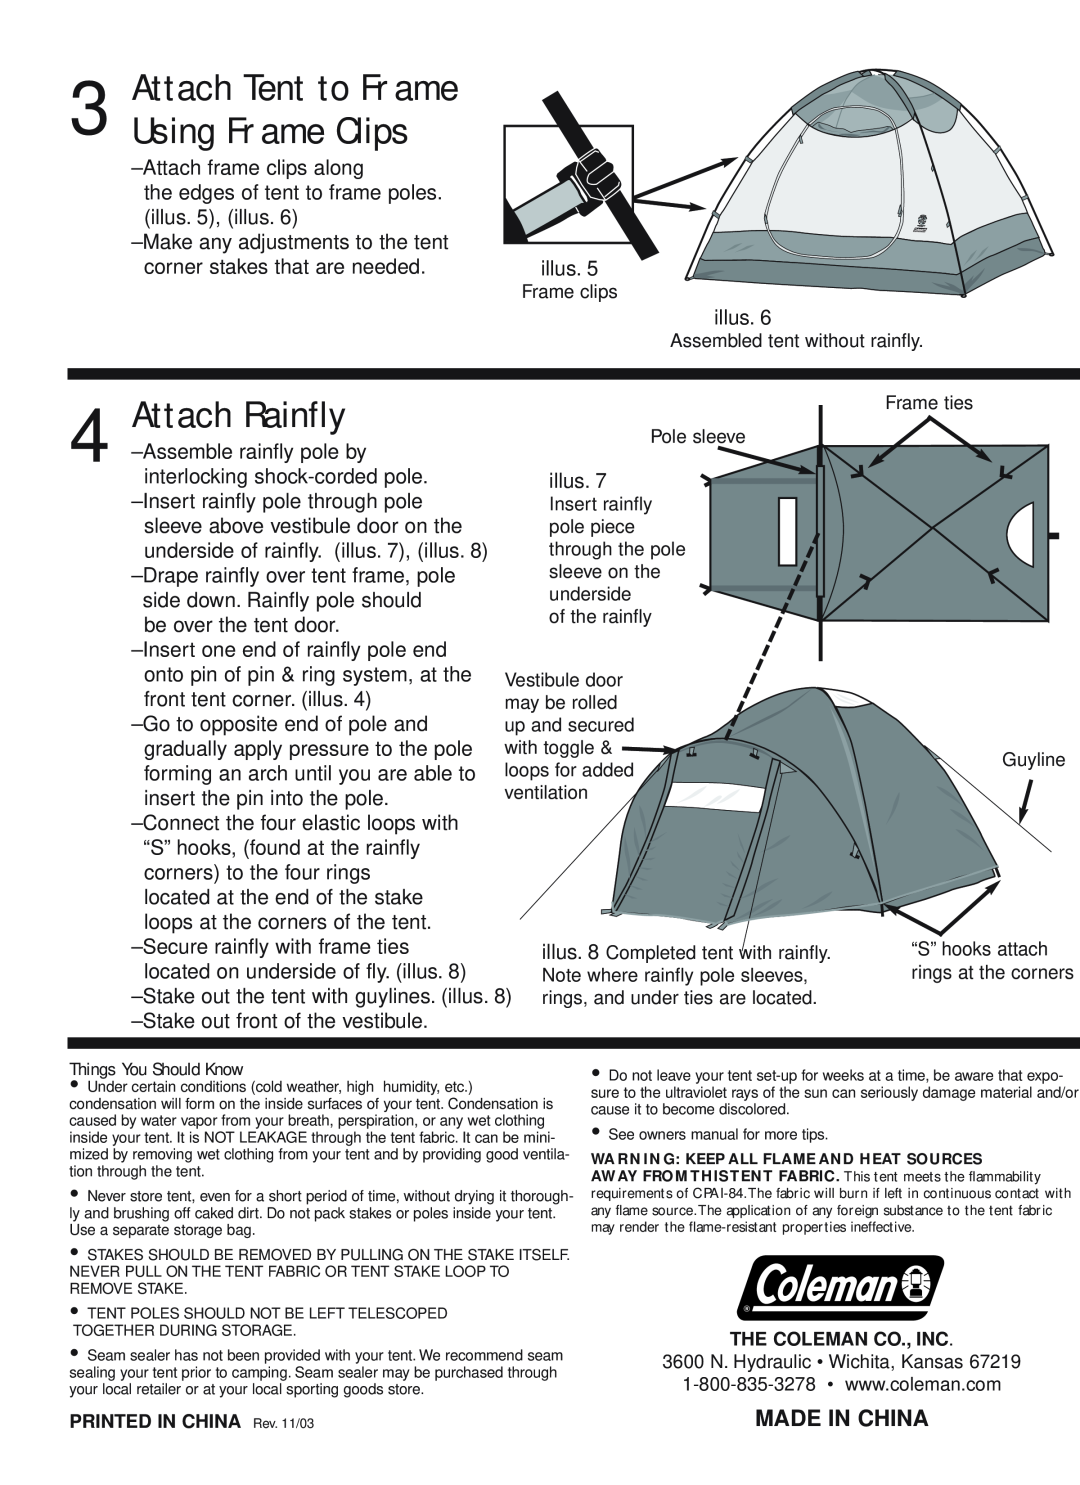 Coleman 9260-213, 9260-107, 9260-212, 9260-211 Attach Tent to Frame Using Frame Clips, Made In China, Attach Rainfly 